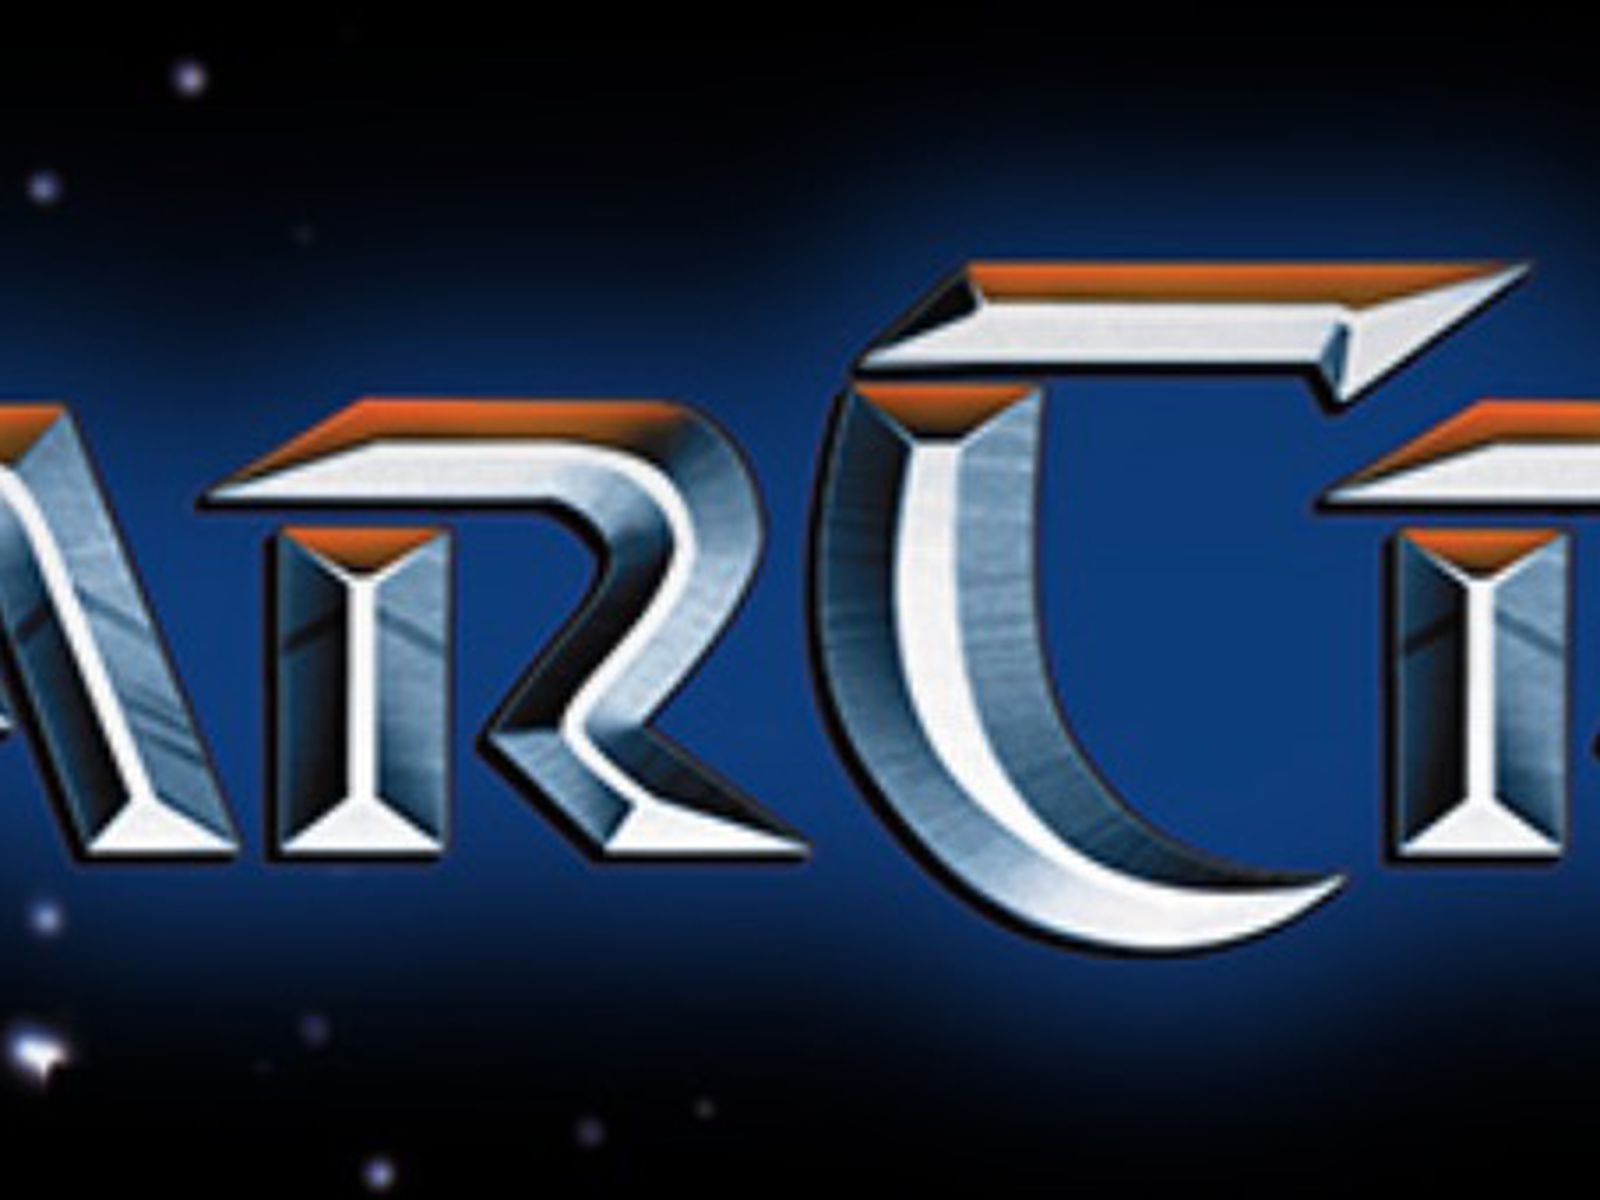 Classic 90s military SF strategy game StarCraft is now free to play on Mac  [Video] - 9to5Mac